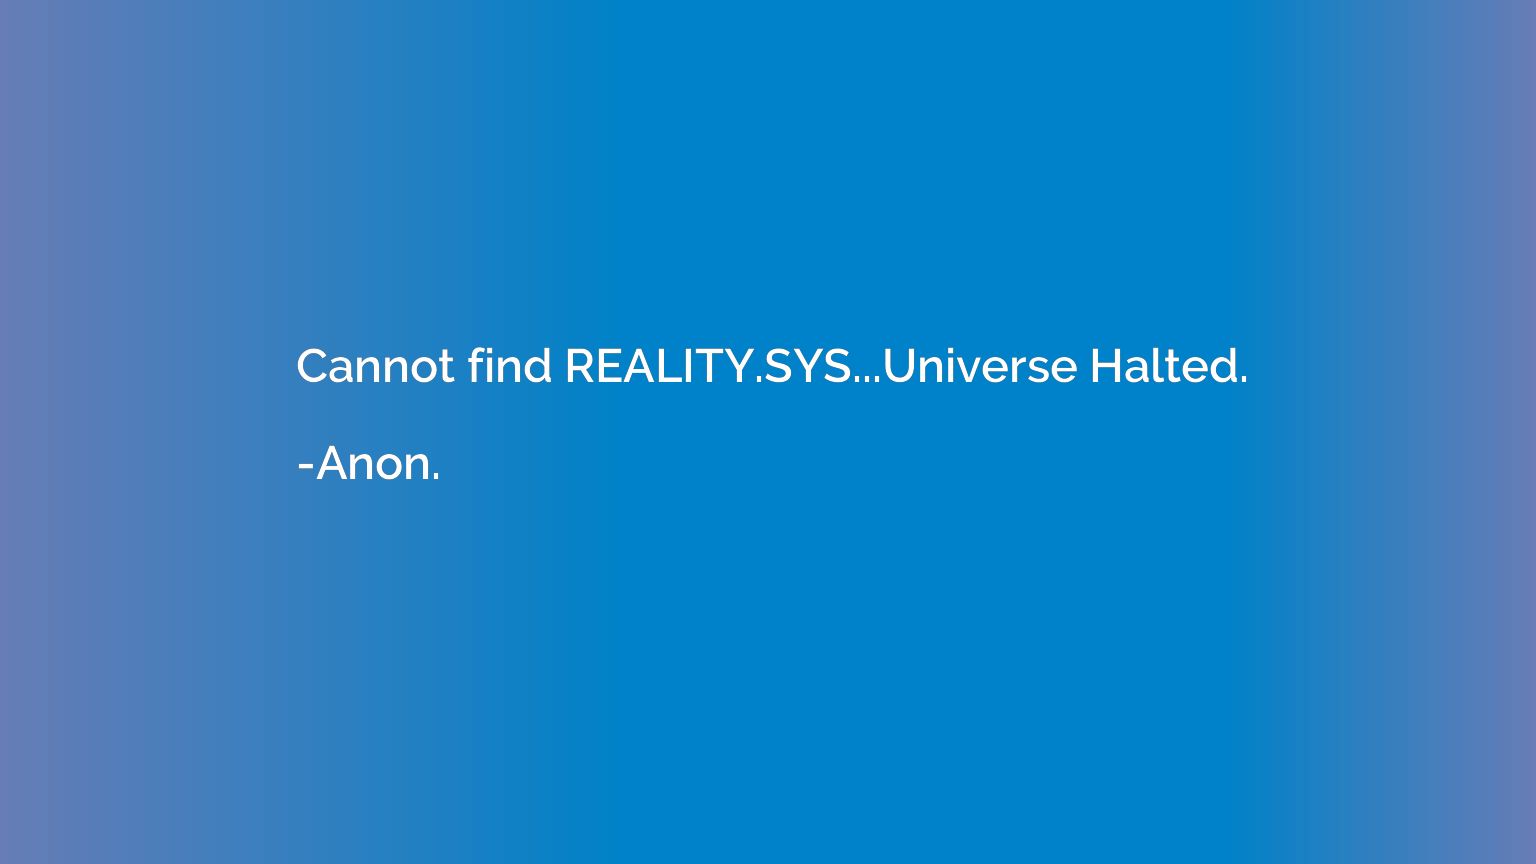 Cannot find REALITY.SYS...Universe Halted.